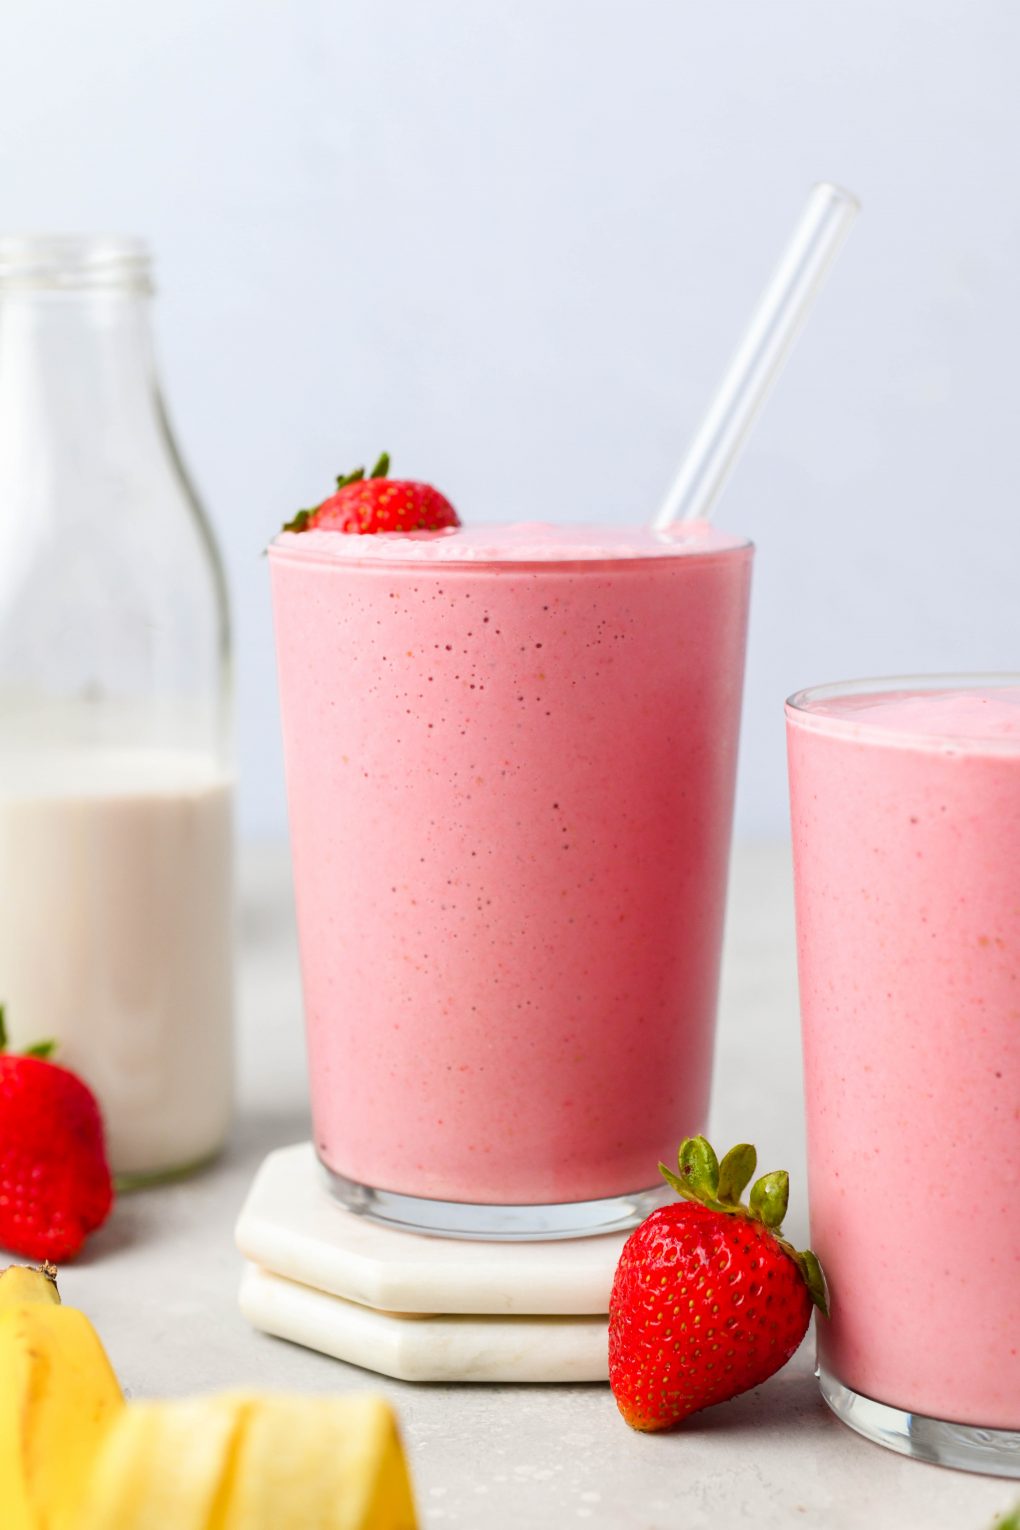 Straight on shot of 2 side by side glasses of strawberry banana smoothie. On a light colored background next to a glass jar of dairy free milk, some fresh strawberries, and a banana peel. 